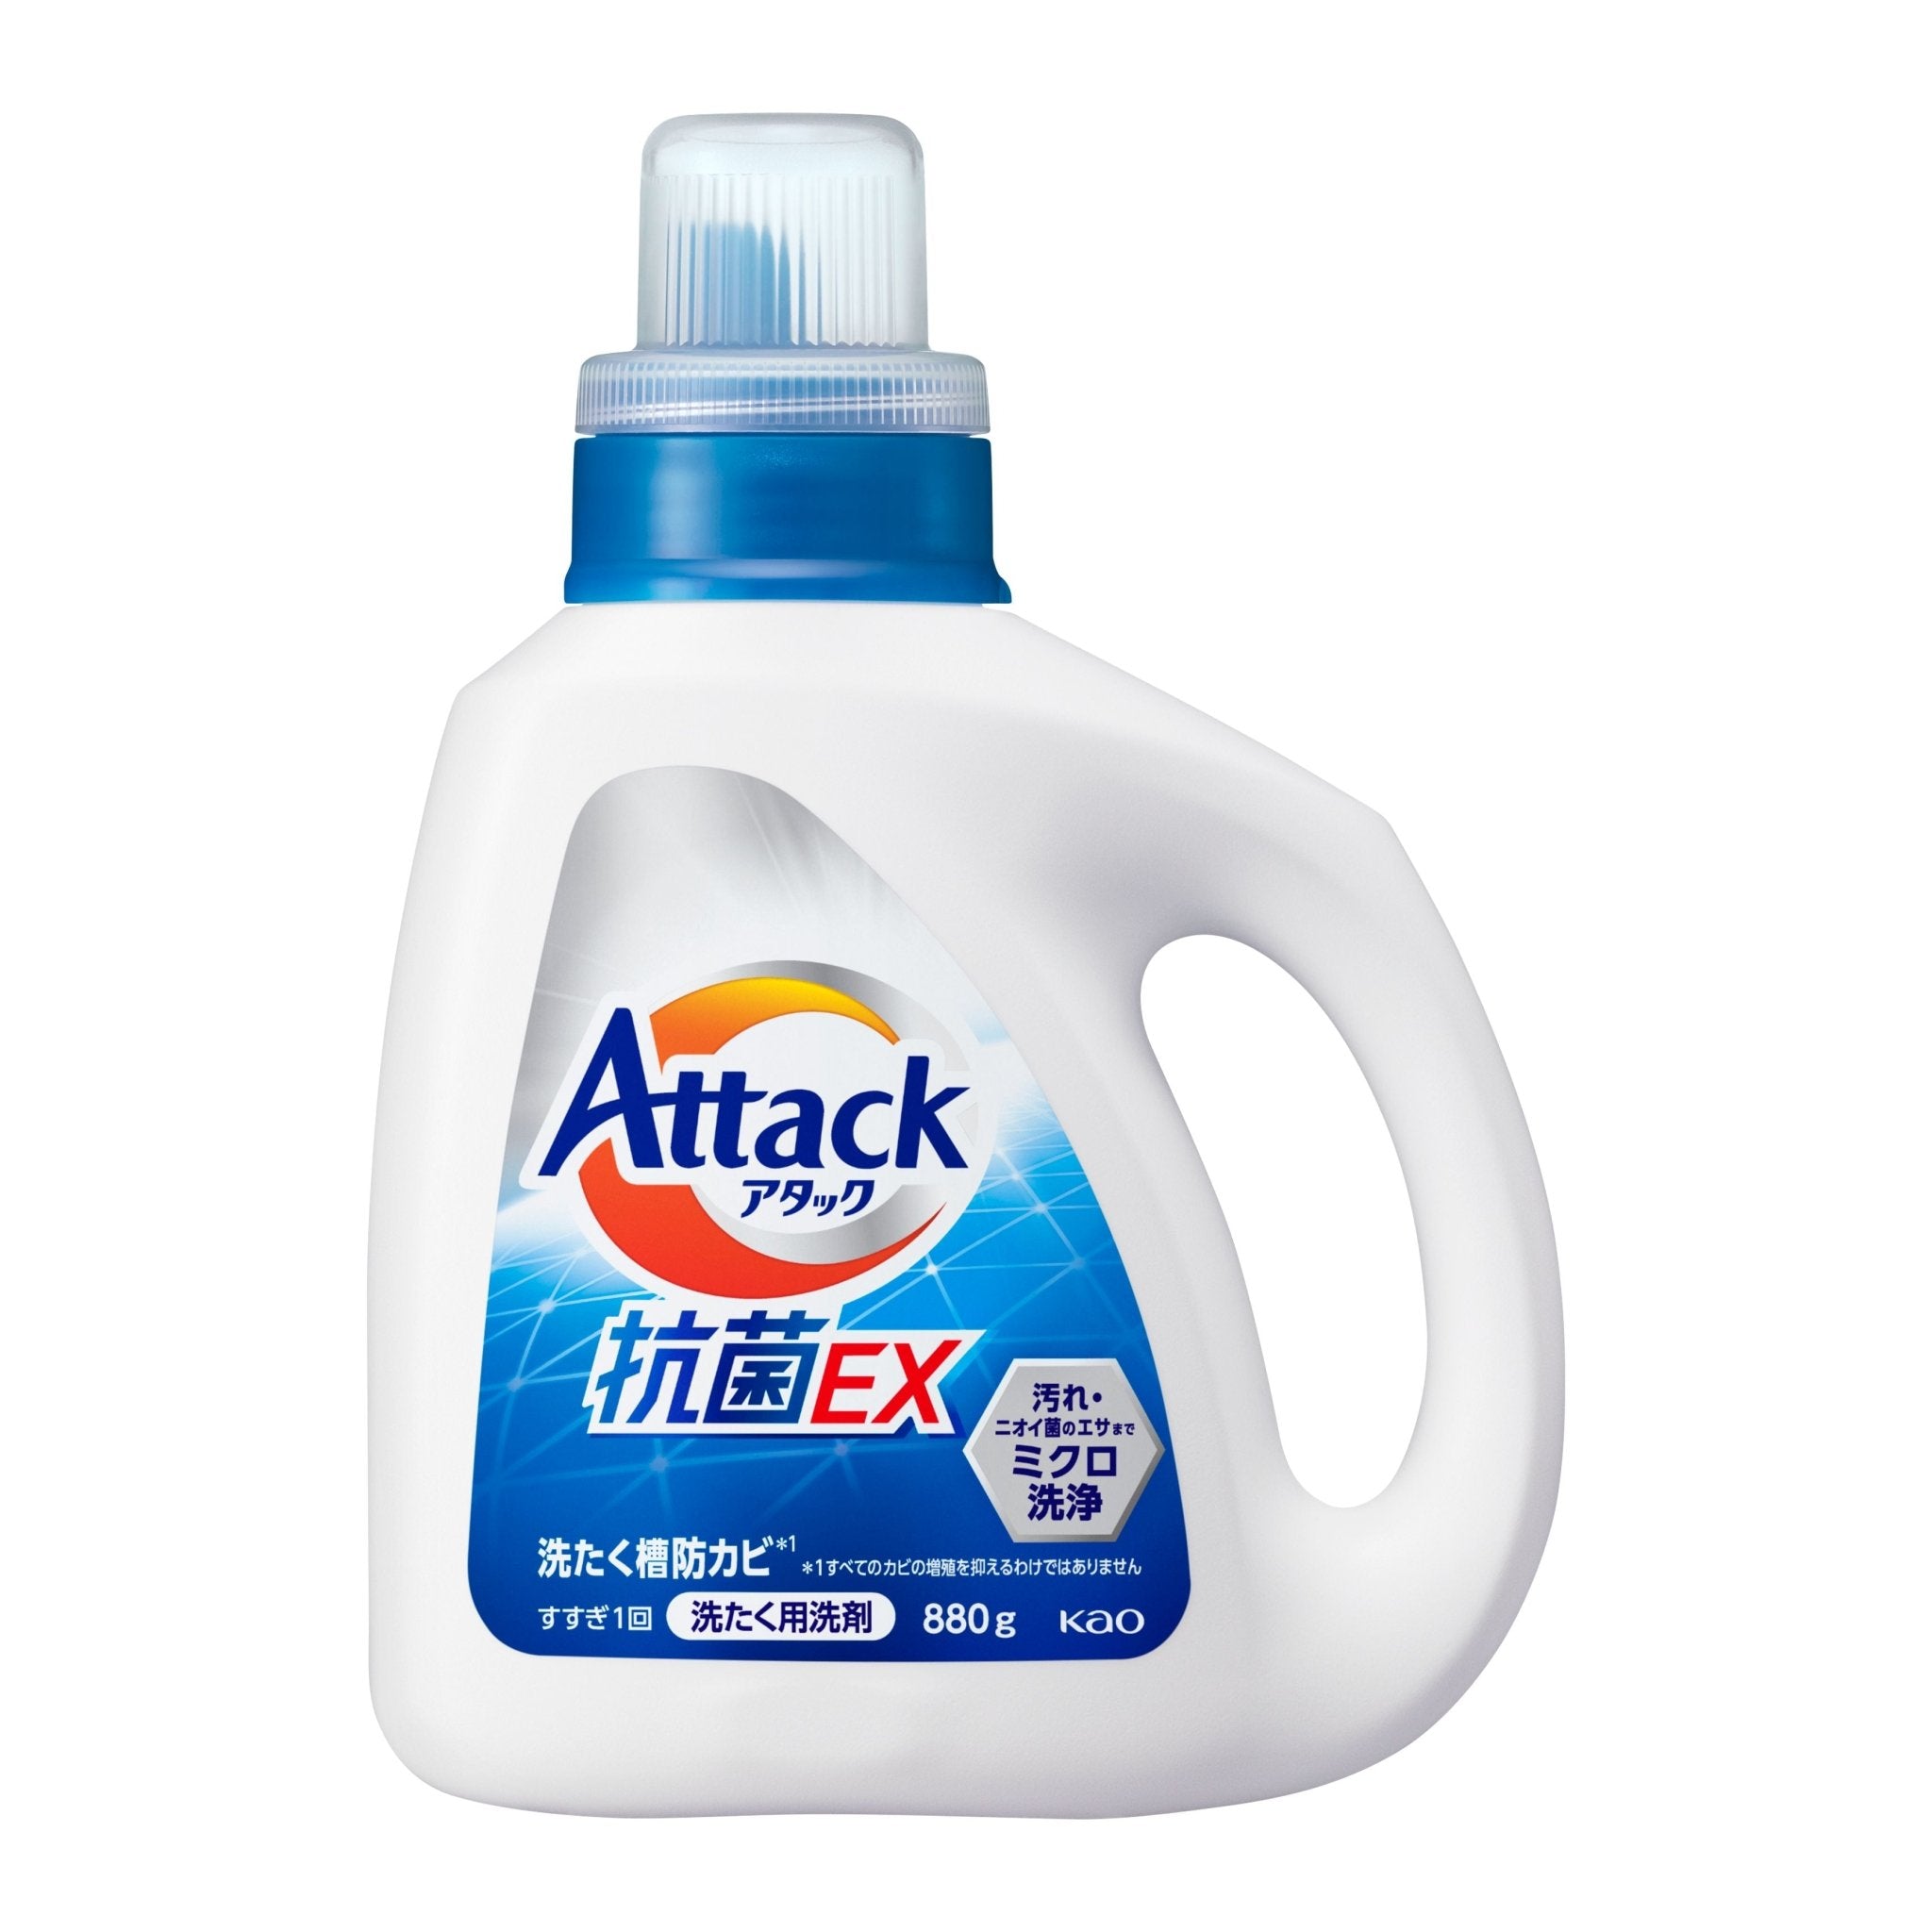 Kao Attack Super Clean EX Laundry Detergent 880g - Kao | Kiokii and...